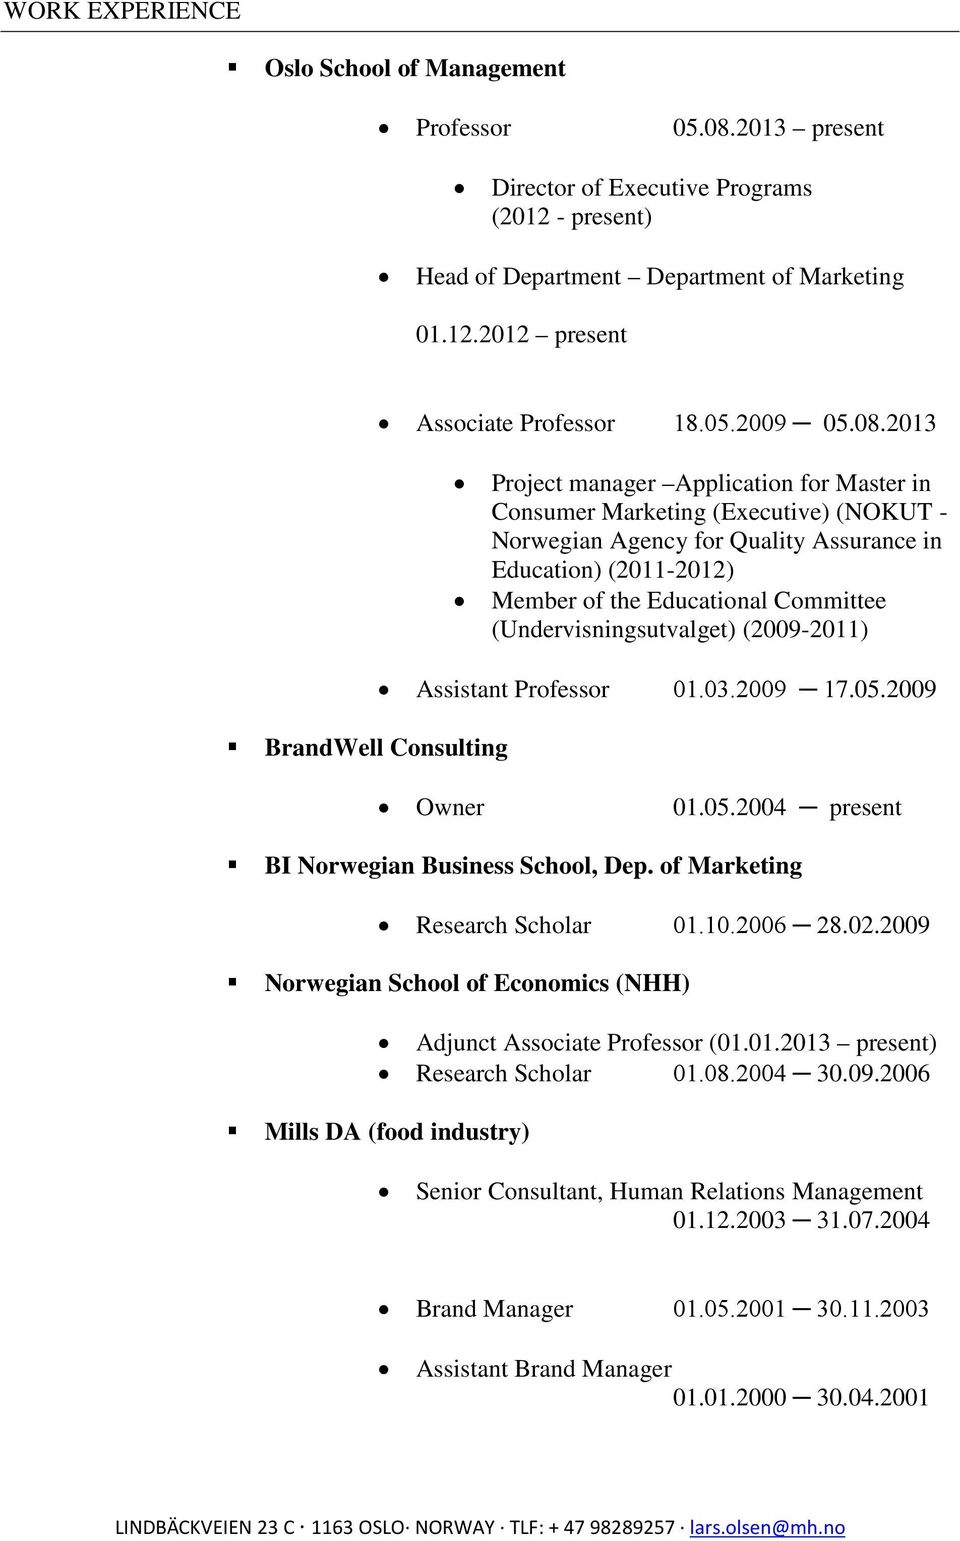 2013 Project manager Application for Master in Consumer Marketing (Executive) (NOKUT - Norwegian Agency for Quality Assurance in Education) (2011-2012) Member of the Educational Committee